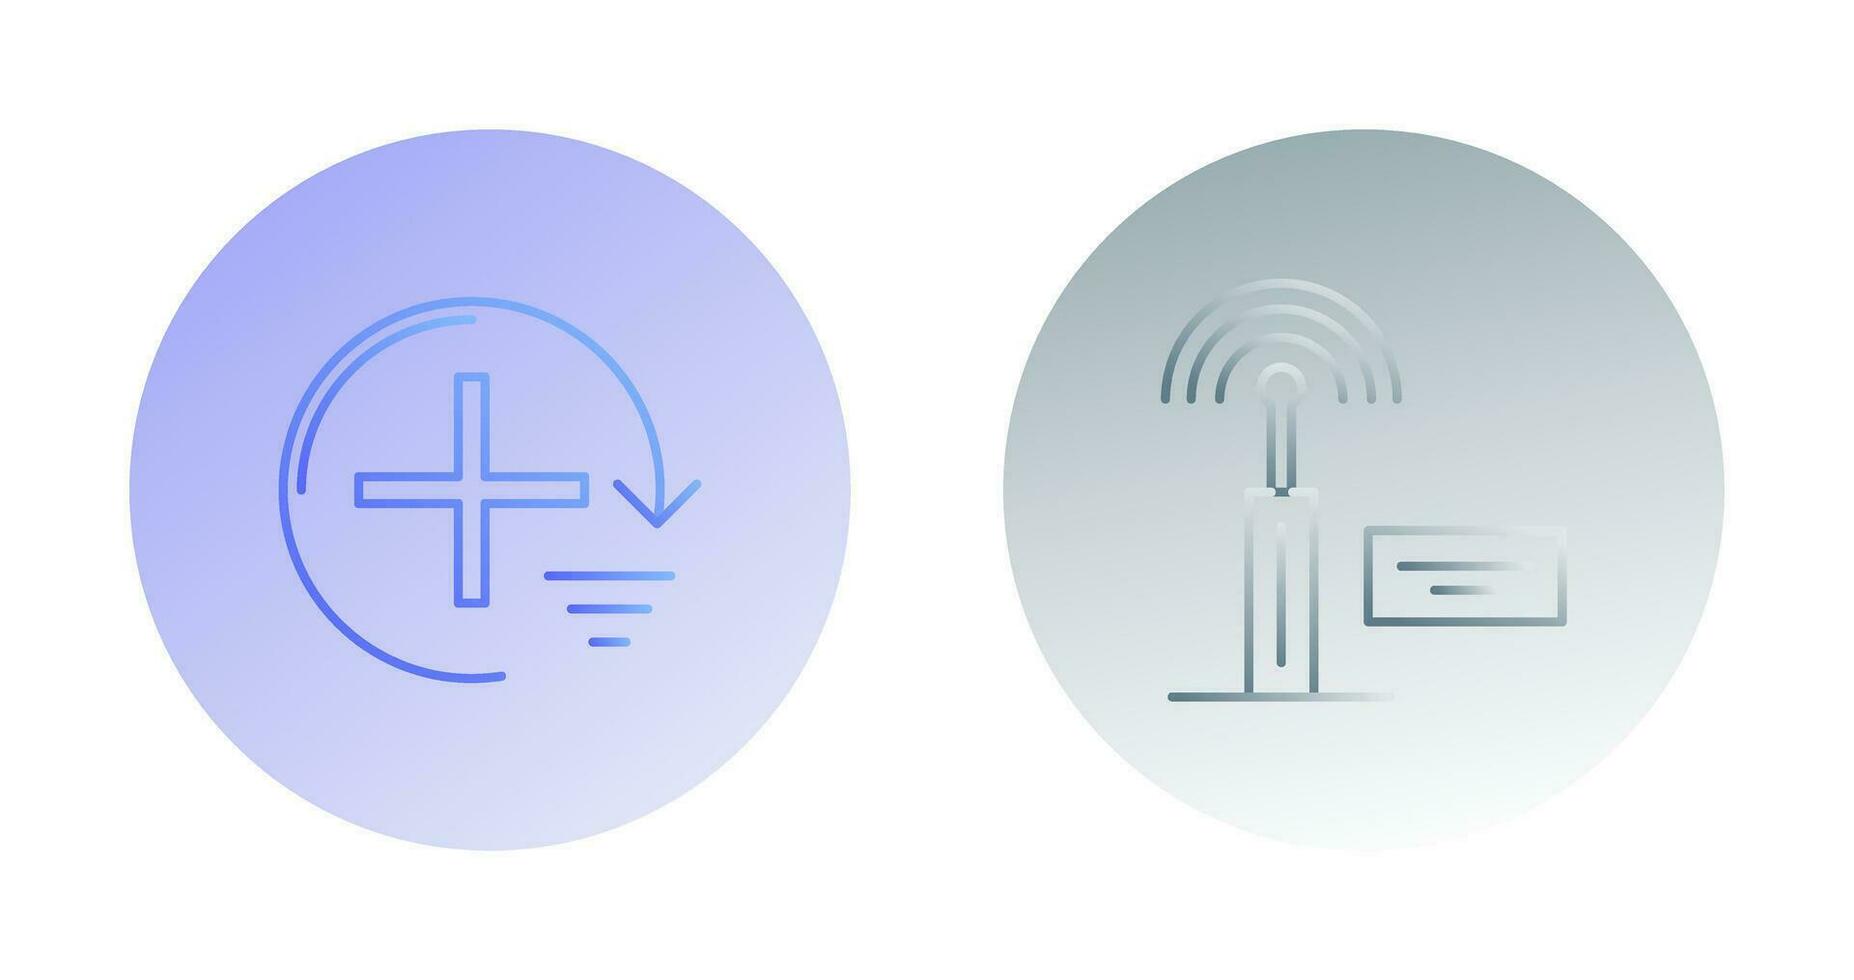 Add and Signal Icon vector